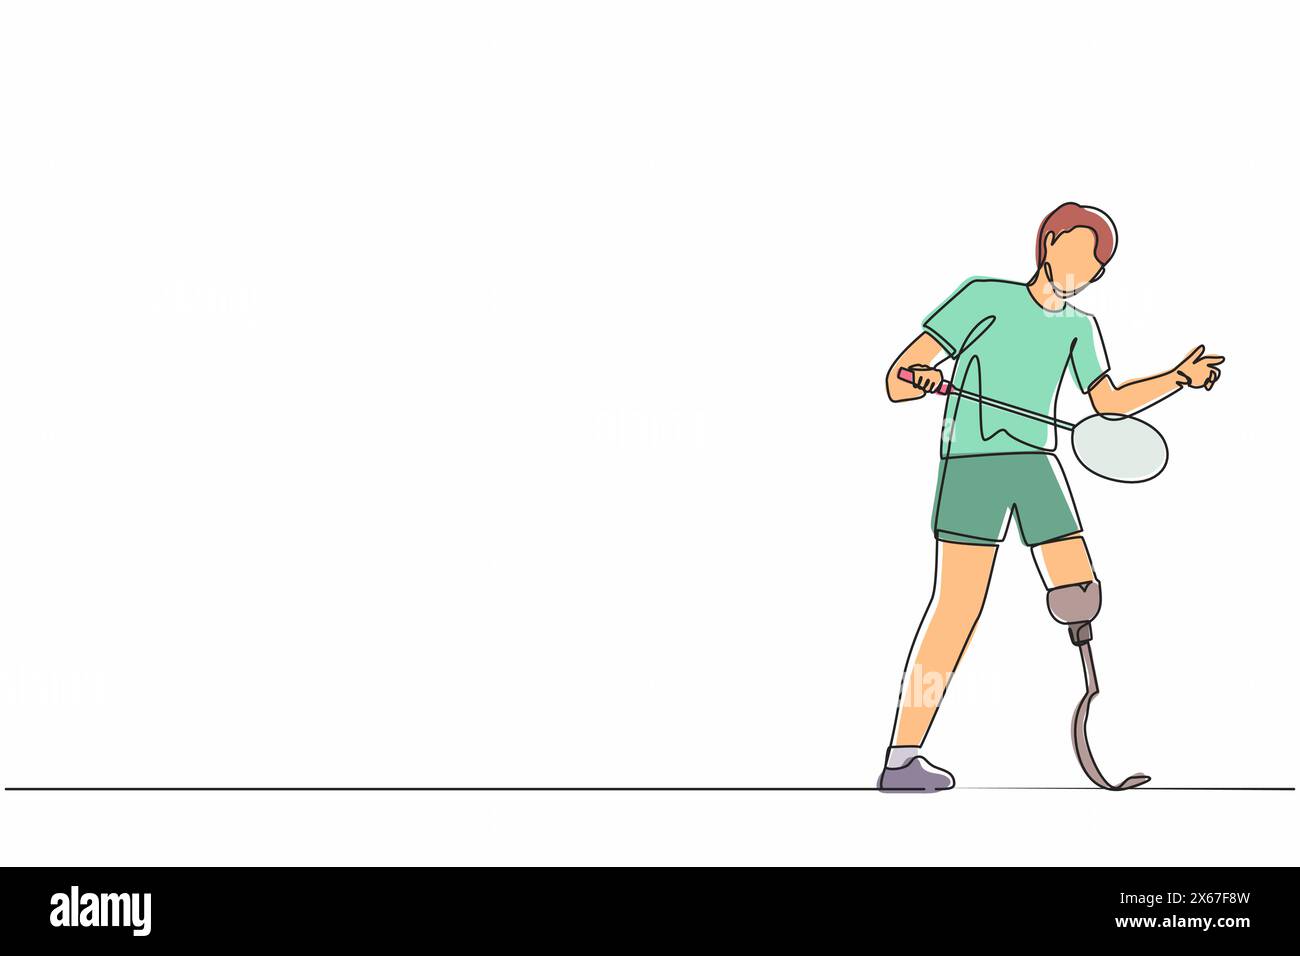 Single continuous line drawing male athlete playing badminton. man with prosthetic leg holding racket. Person with disability performing sports activi Stock Vector